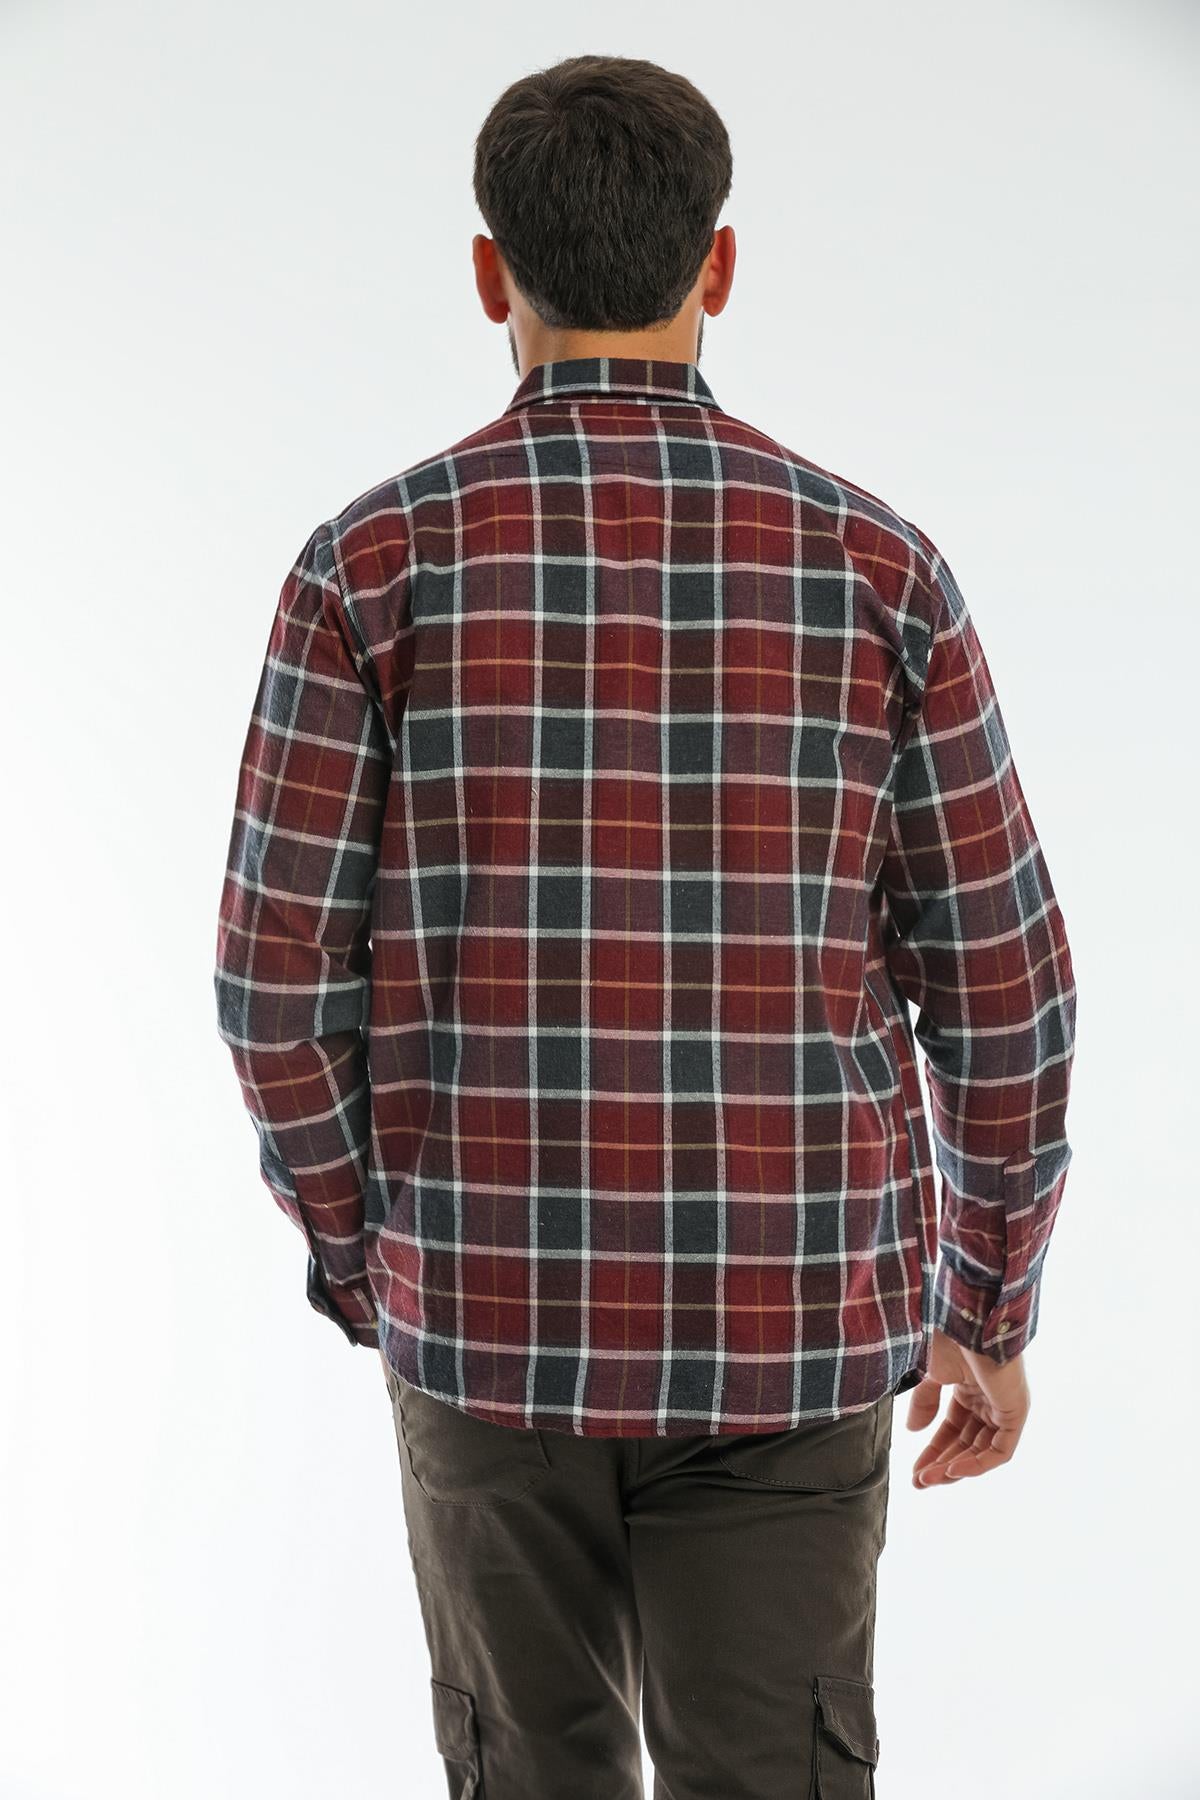 Back buttoned Fland with Flash Pockets without Pockets Men's Shirt